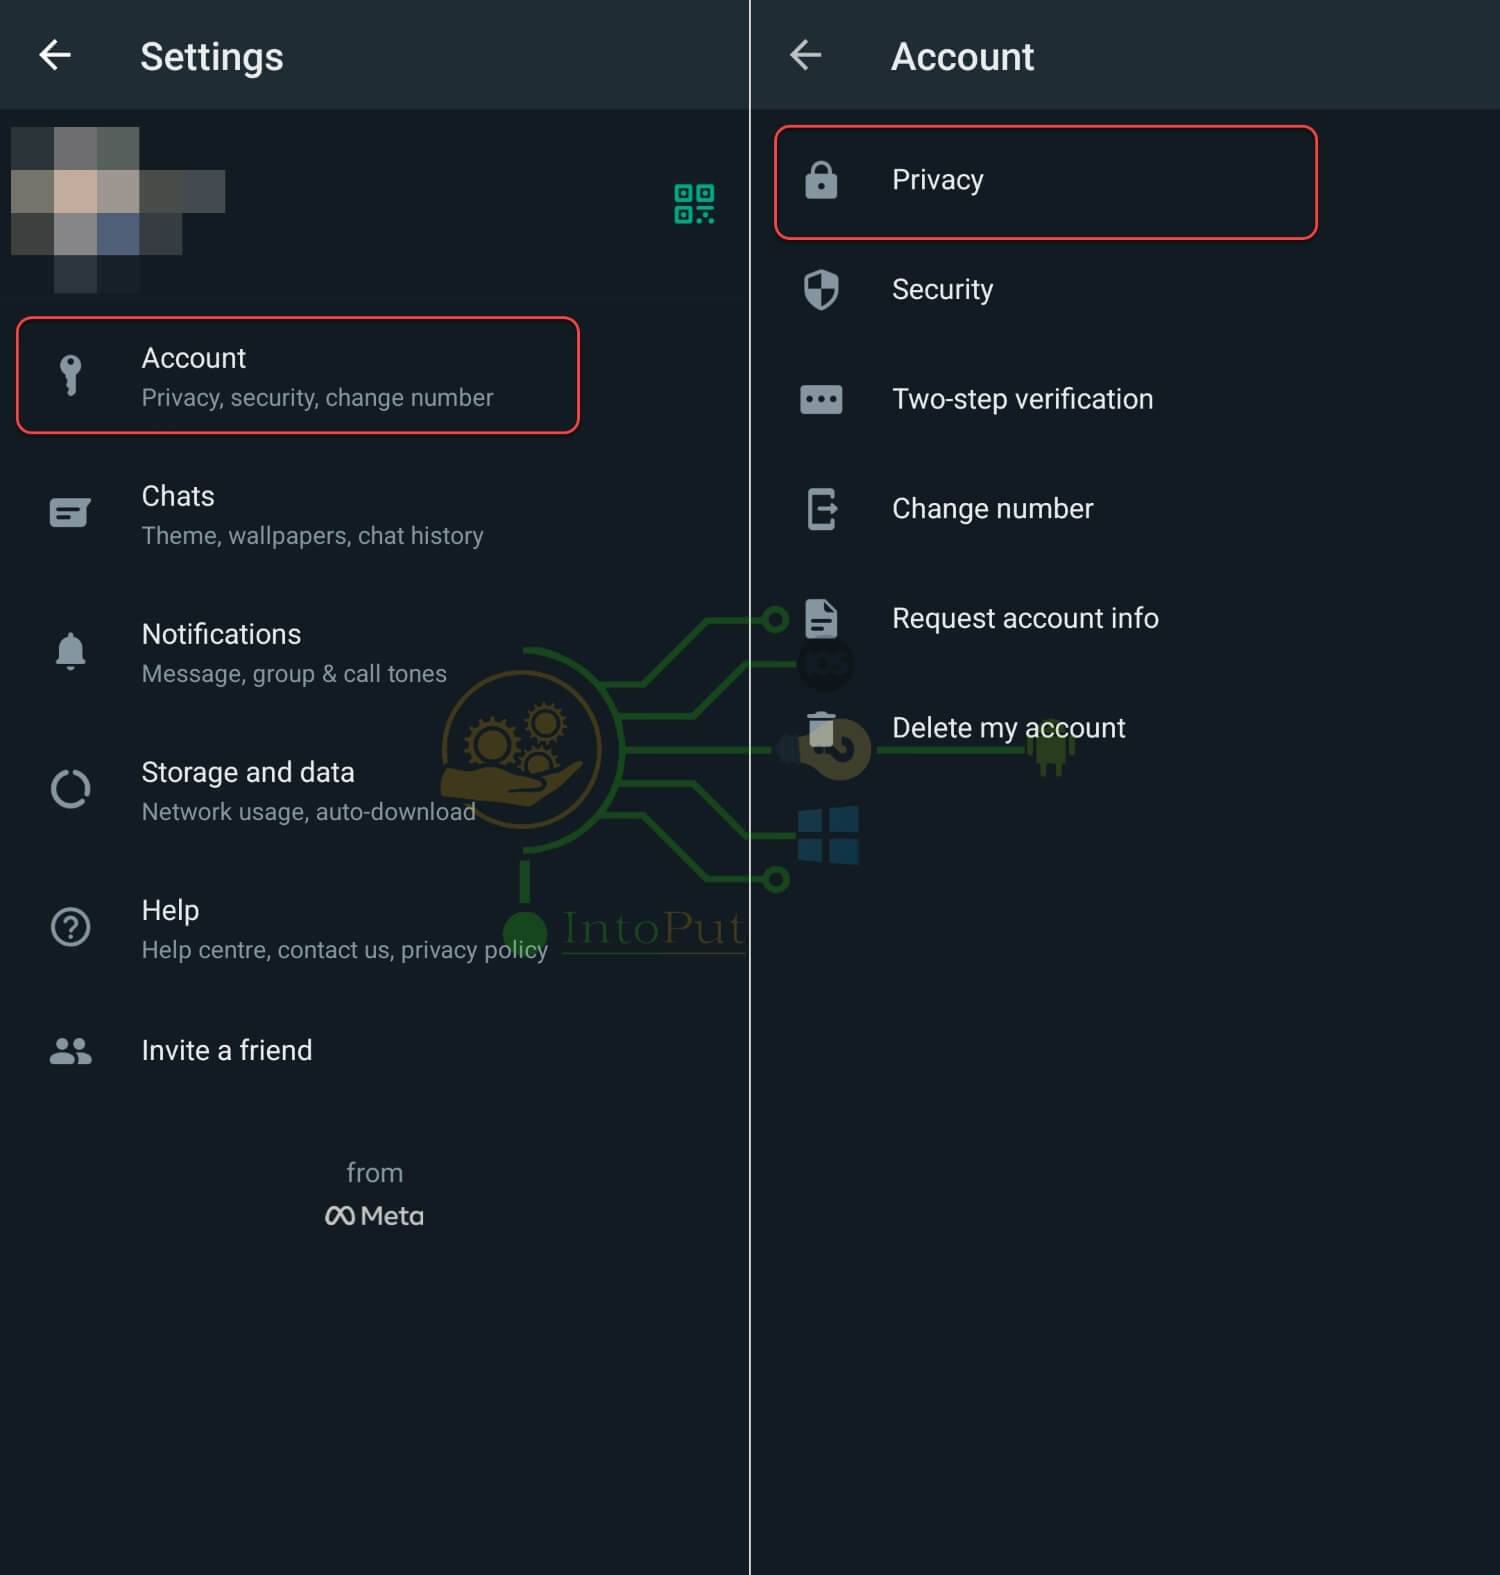 How to Hide Last Seen on WhatsApp for One Person on Android & iPhone